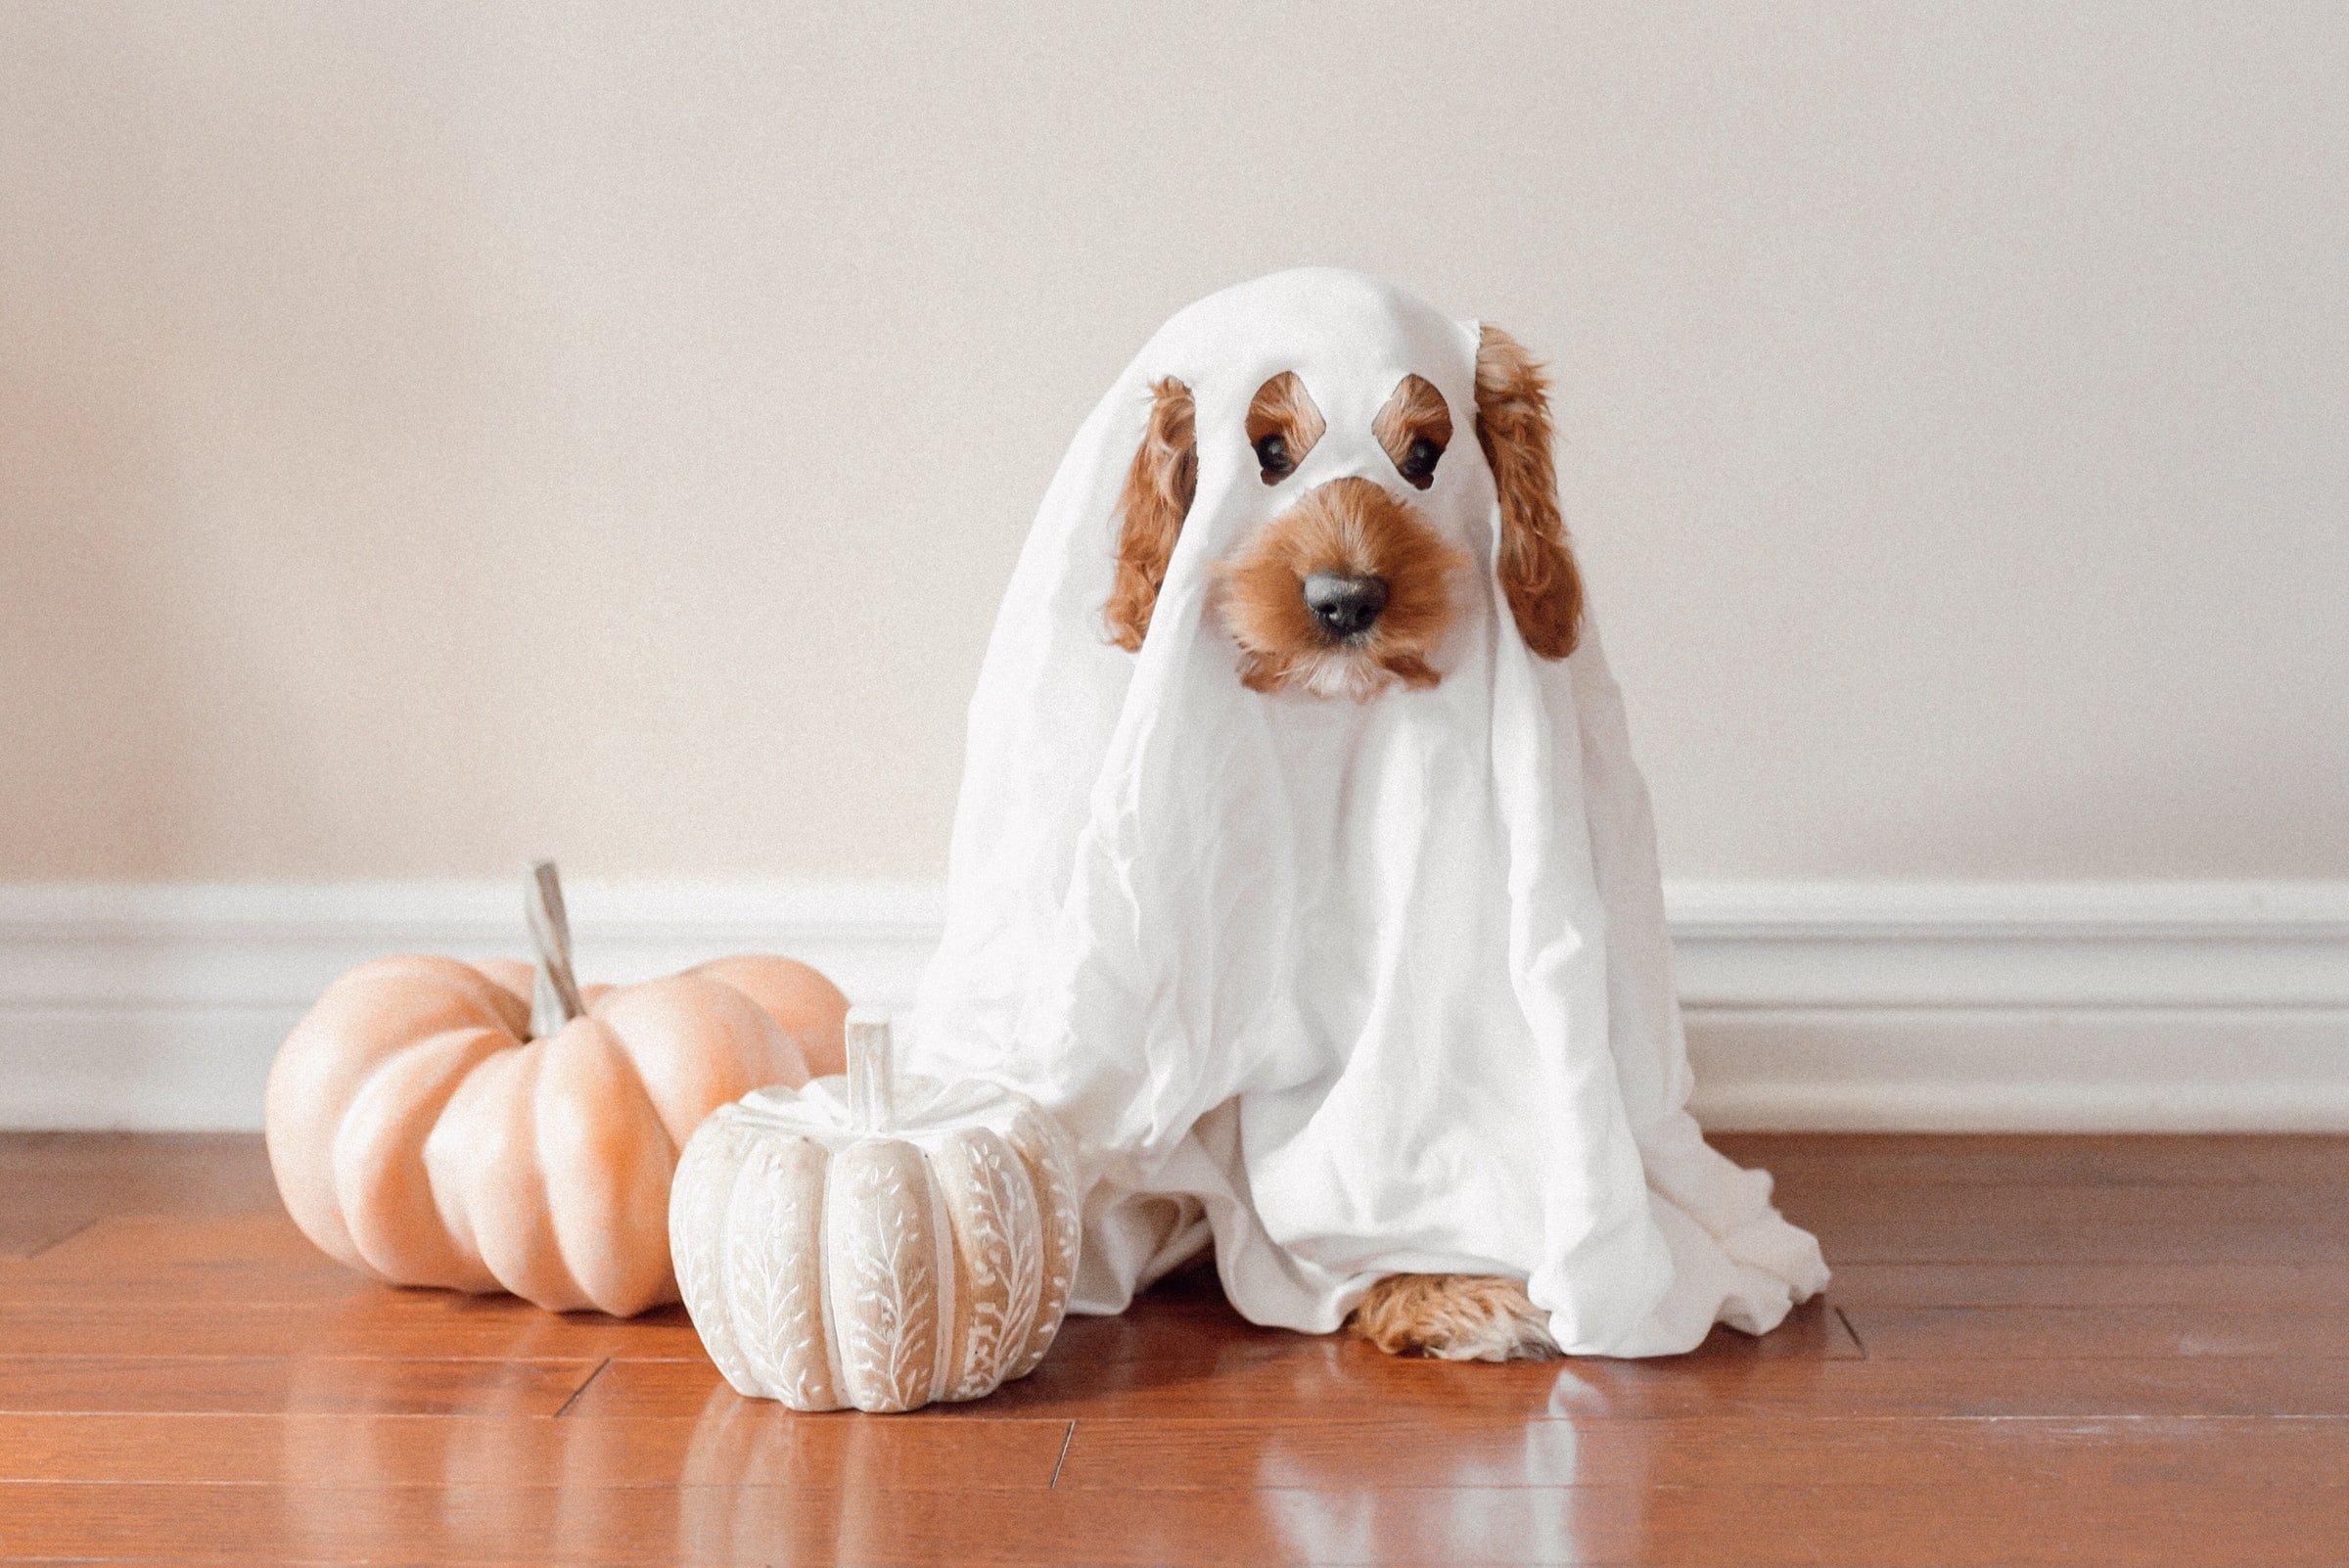 Best Pet Costume and Photoshoot Ideas — Mixbook Inspiration